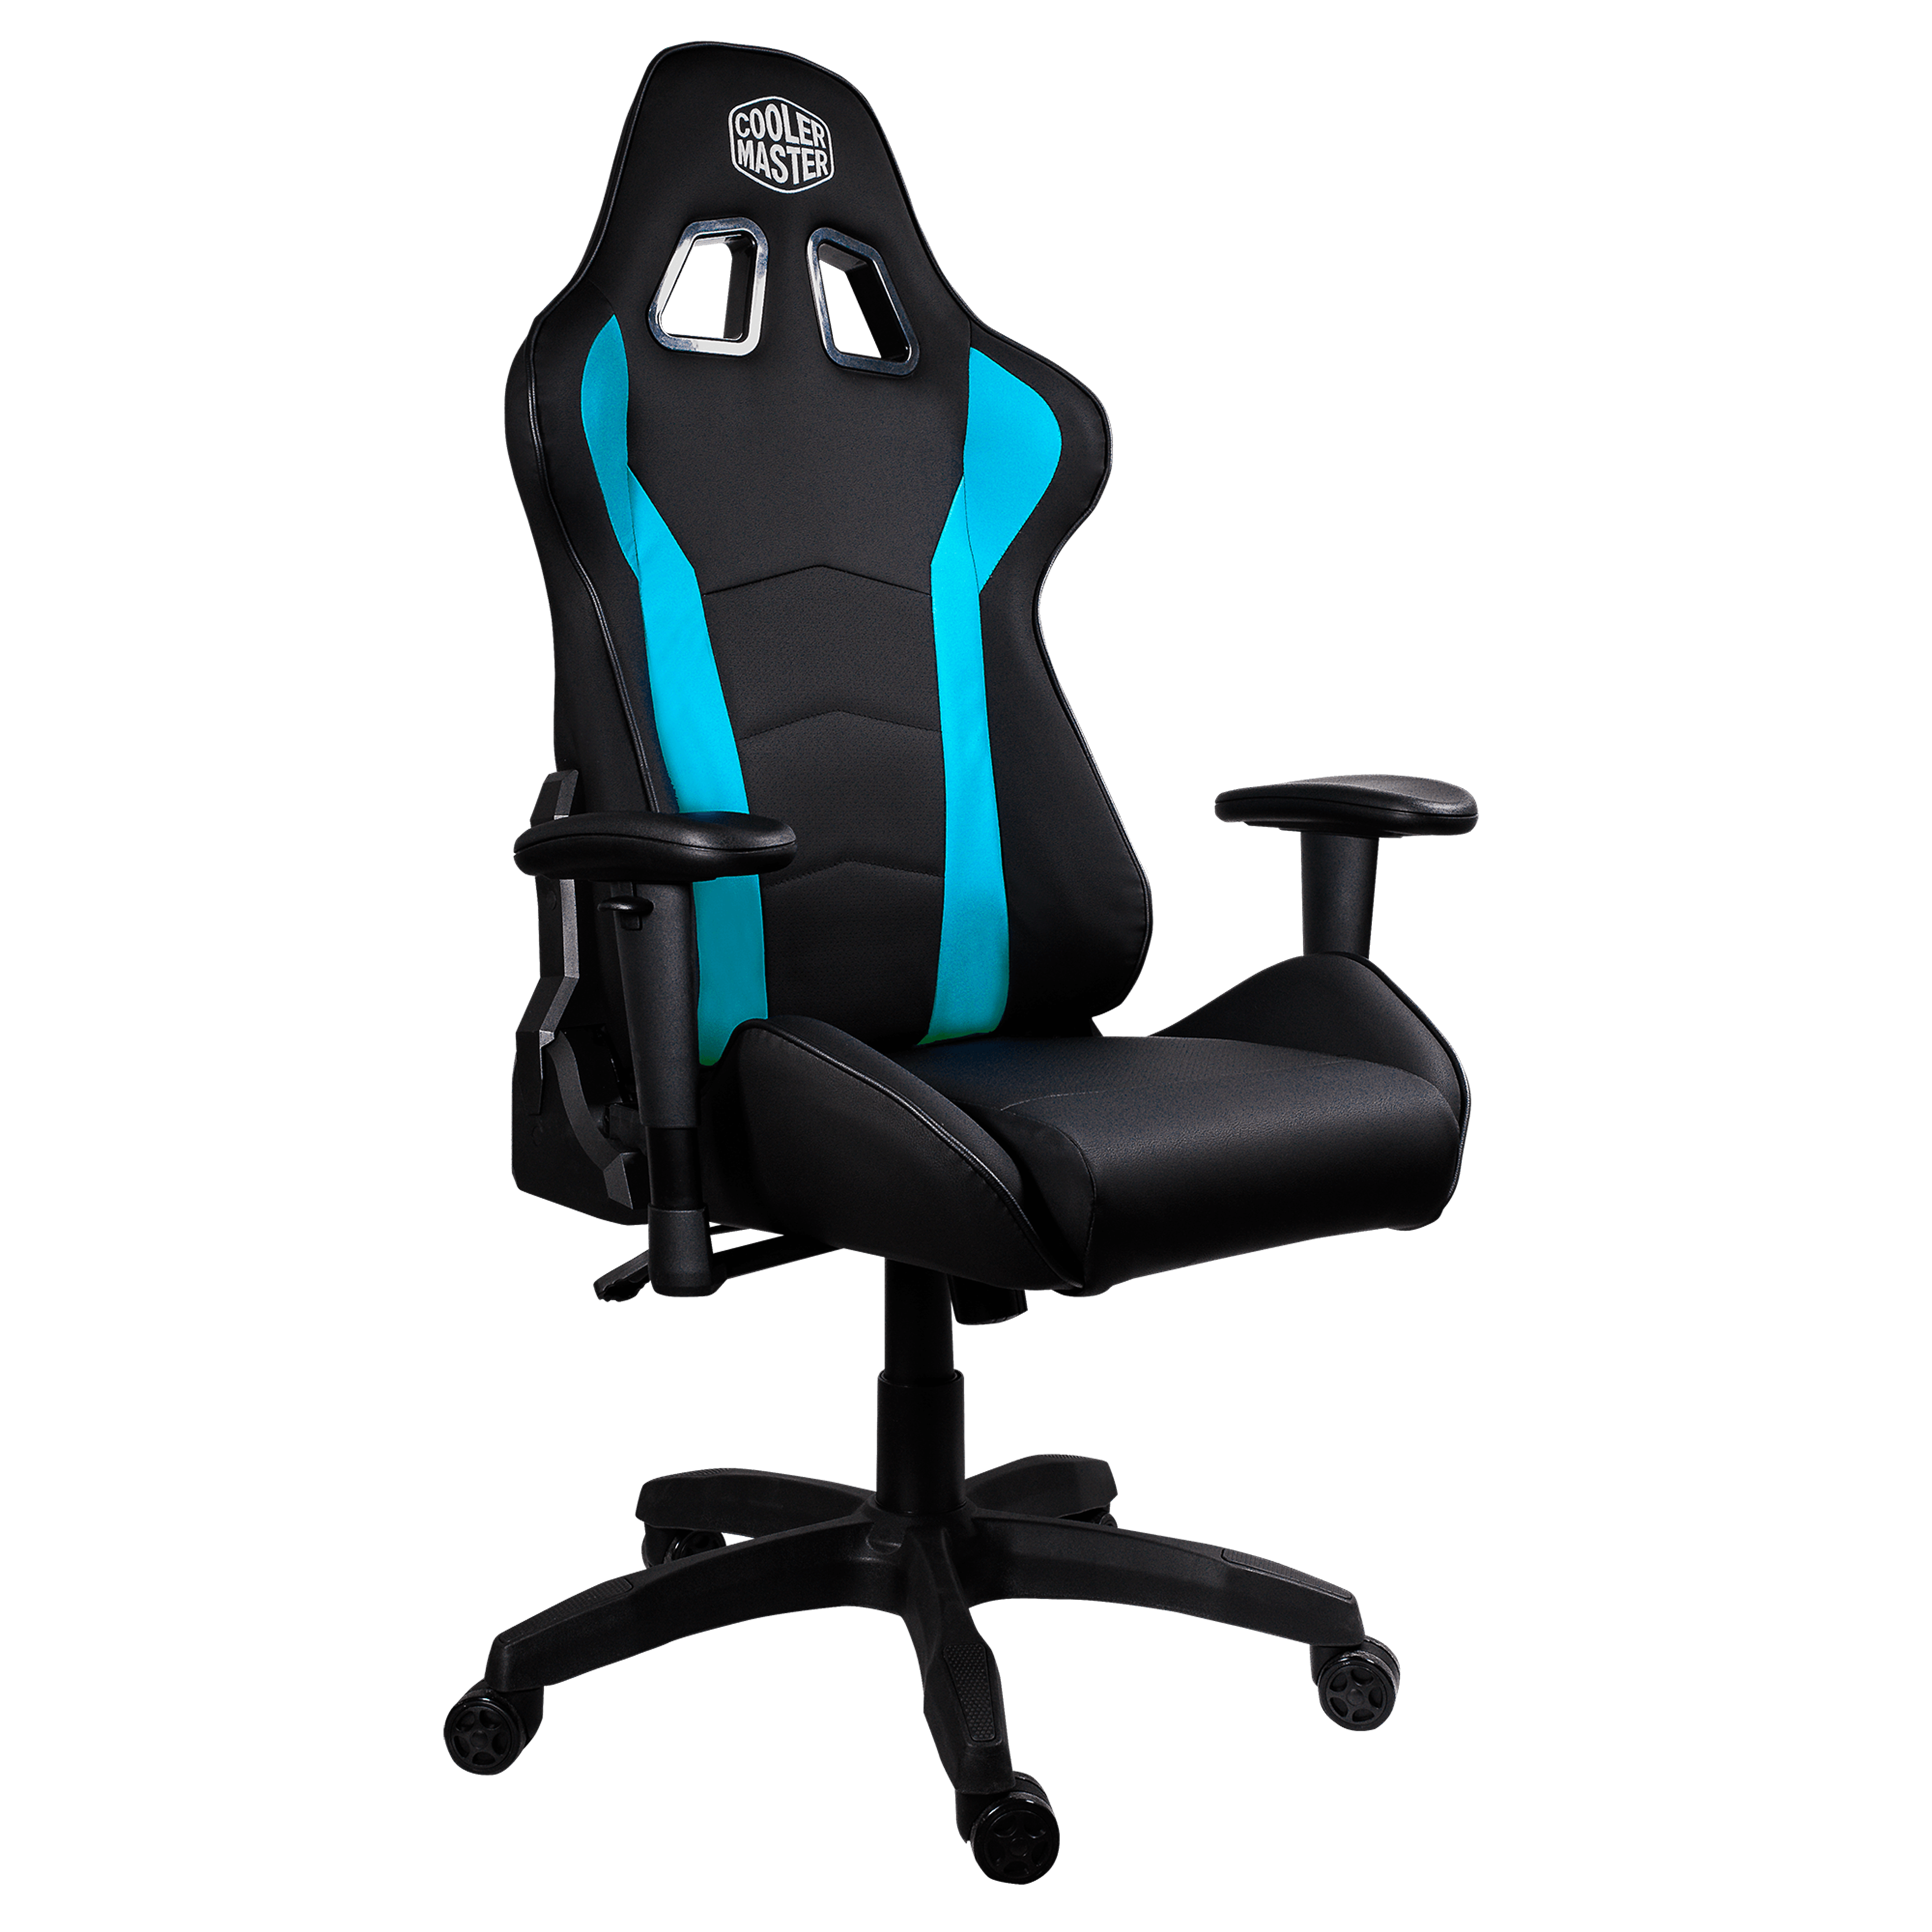 Ecopelle Red Cooler Master Gaming Chair Caliber R1 